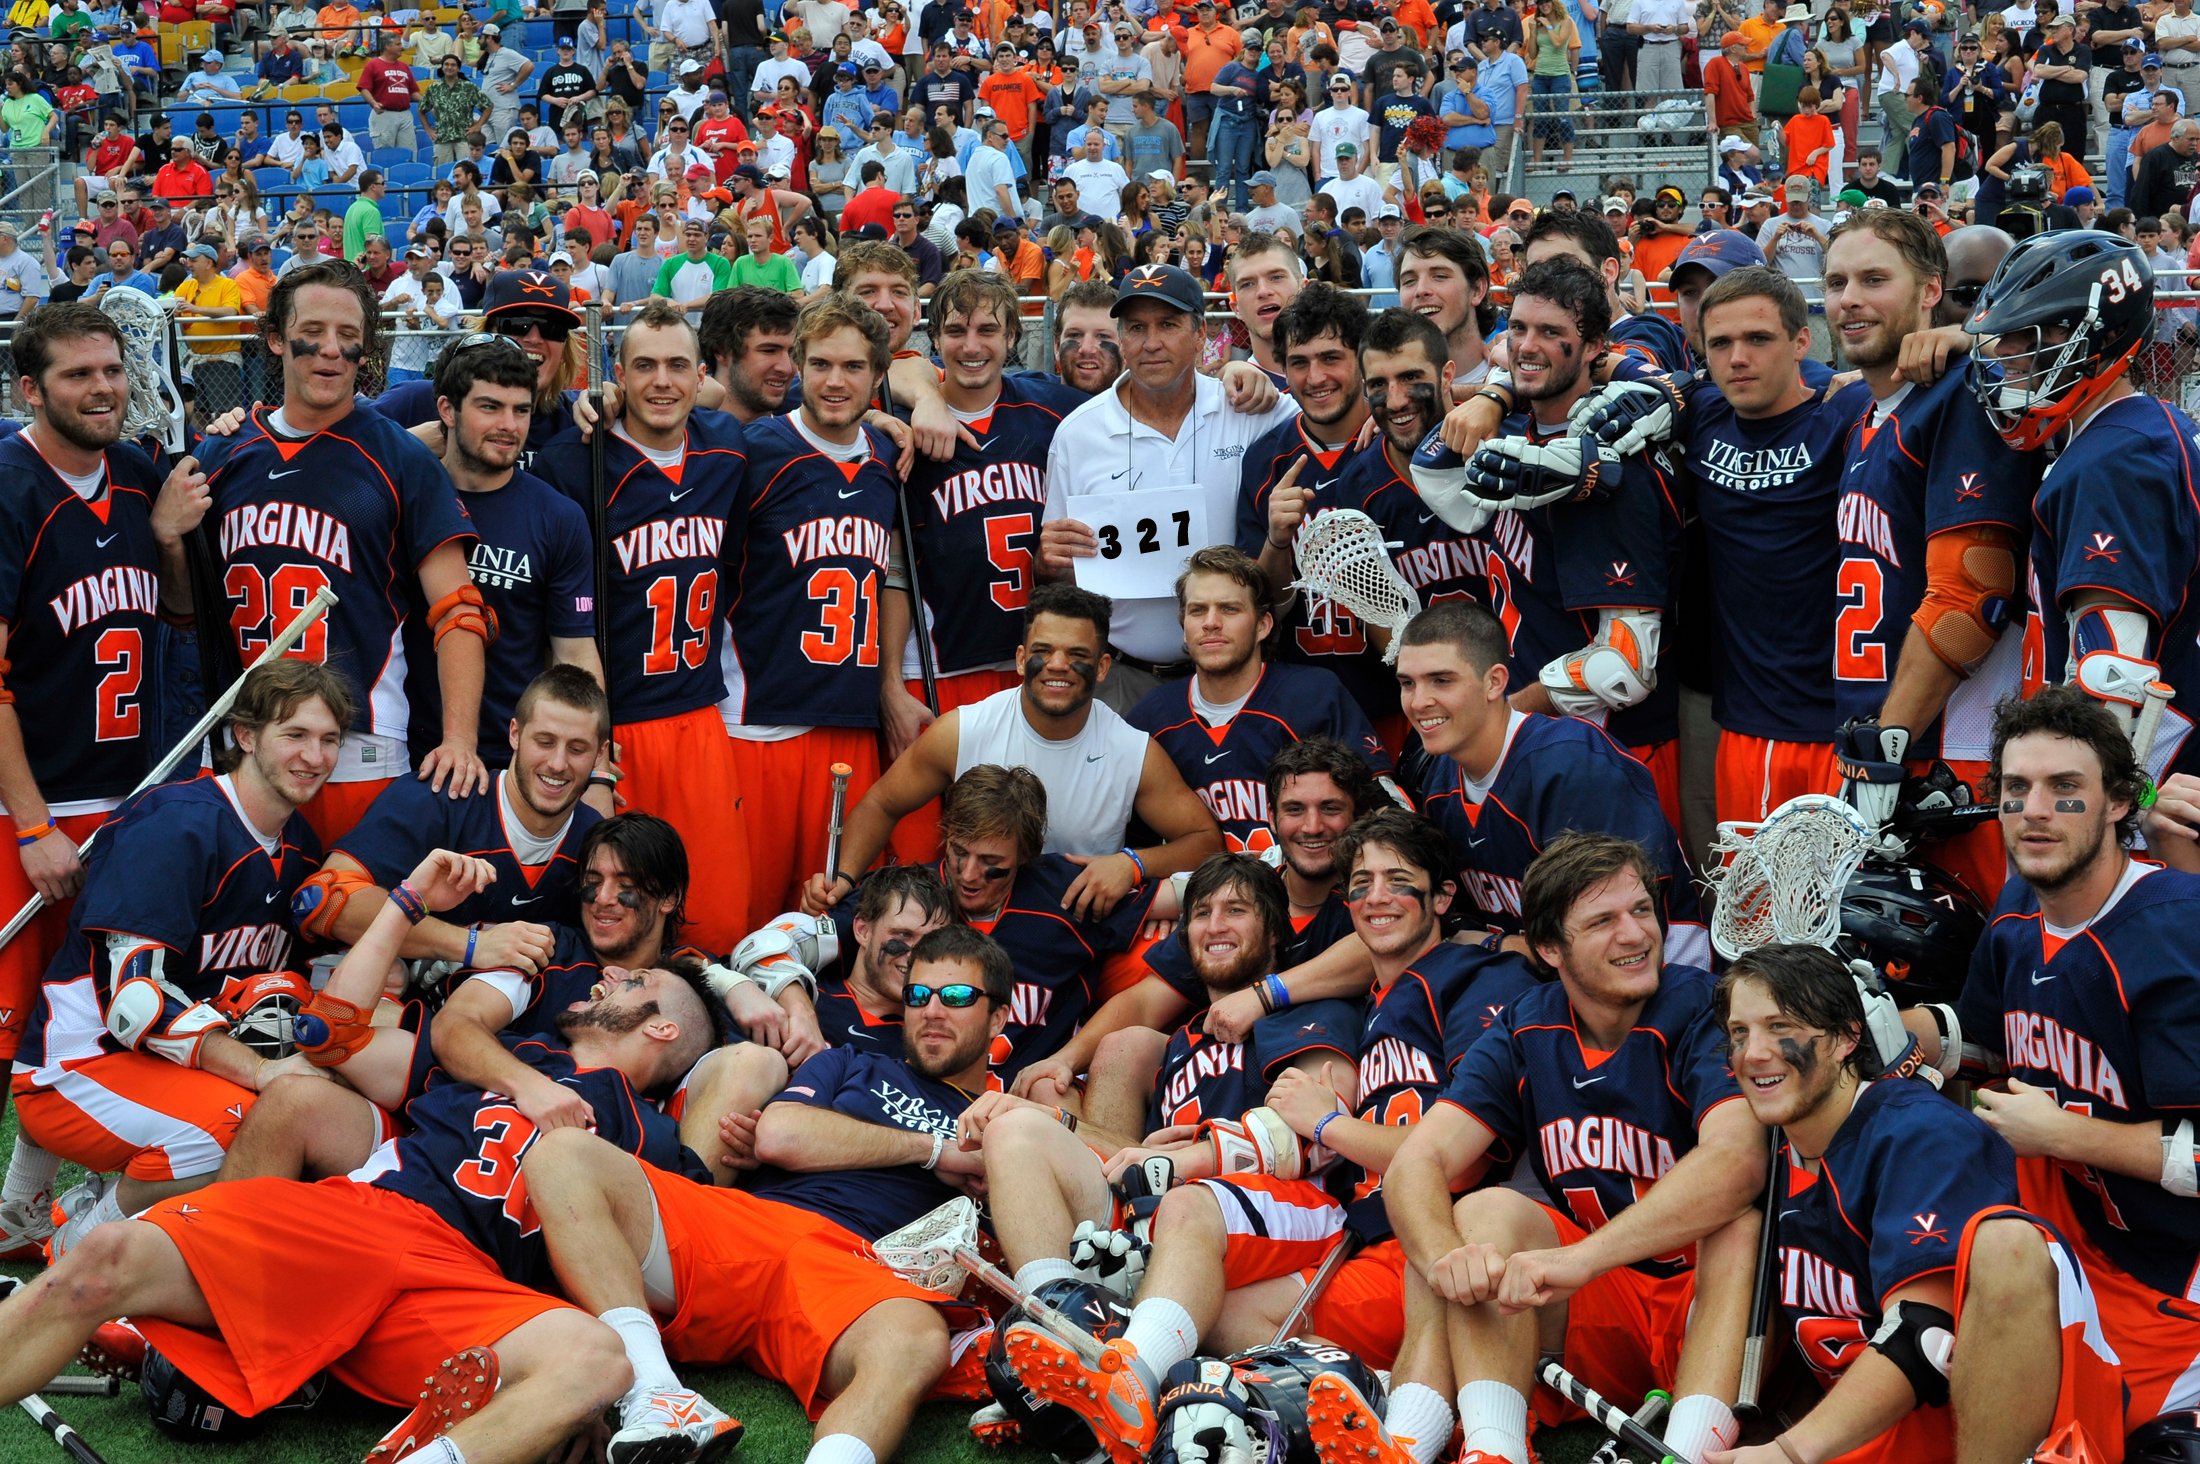 UVA Men's Lacrosse Team Advances to Final Four with 13-9 Win - WVIR NBC29 Charlottesville News